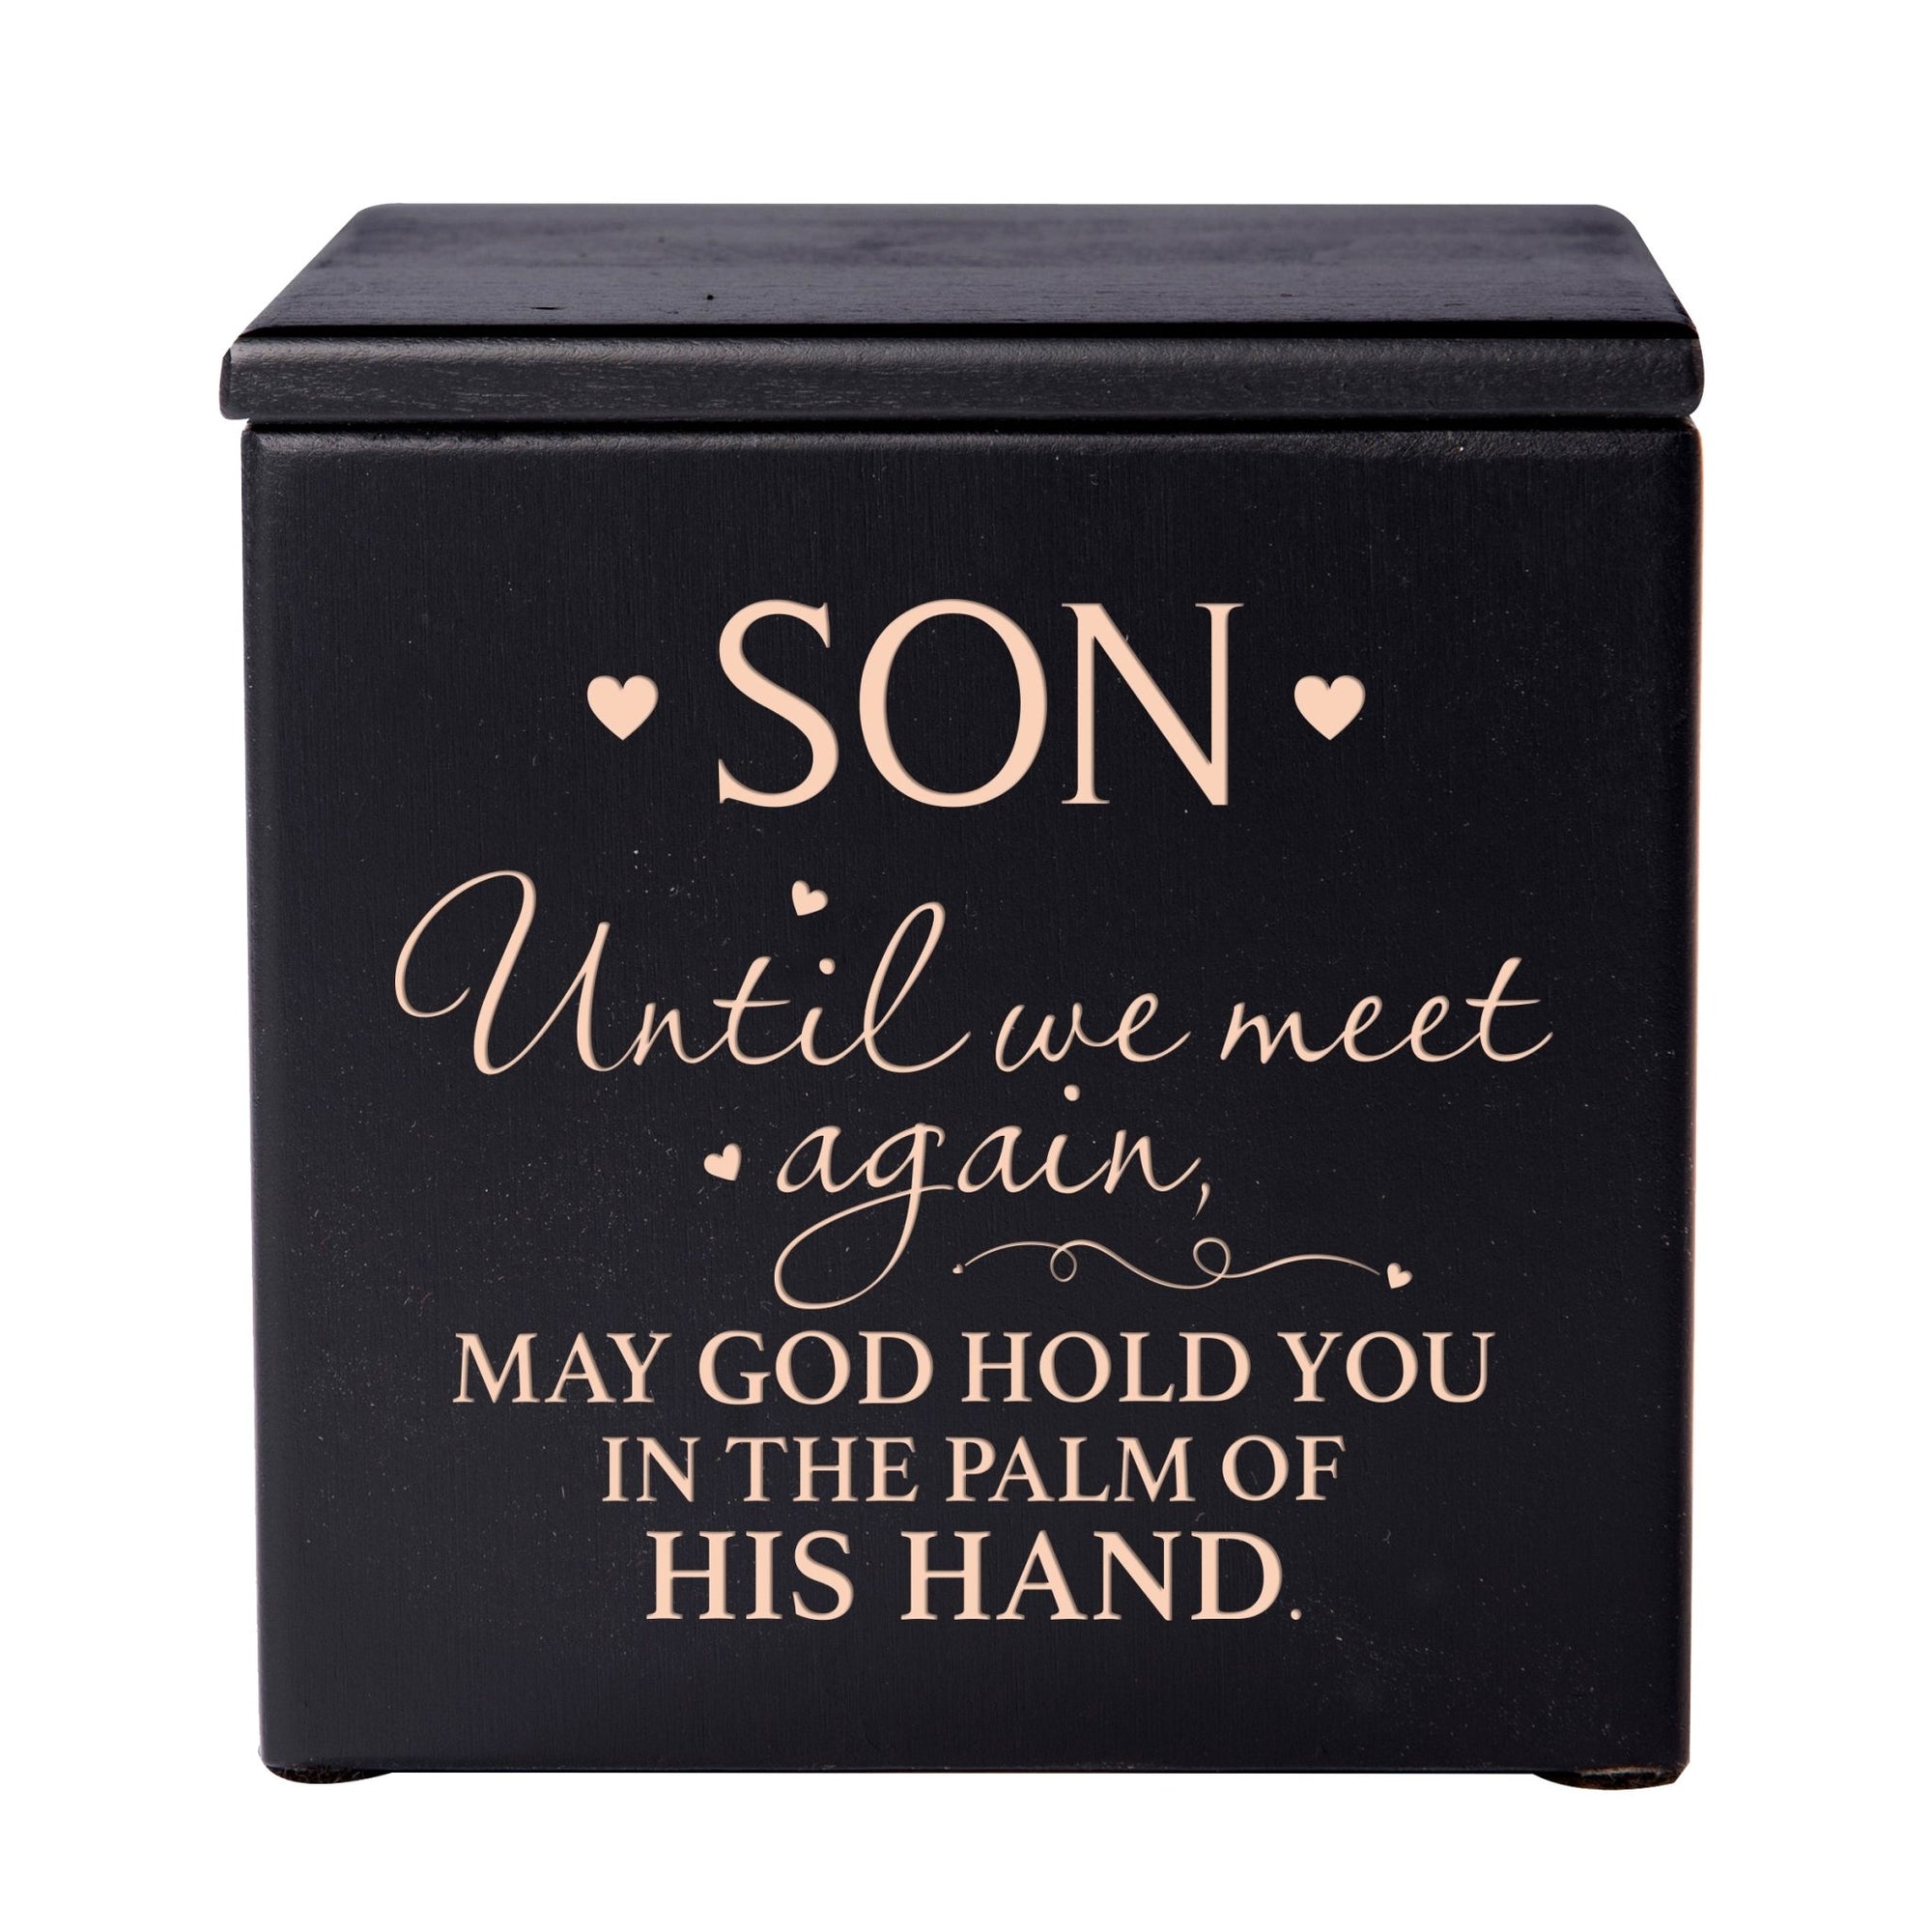 Modern Inspirational Memorial Wooden Cremation Urn Box 4.5x4.5in Holds 49 Cu Inches Of Human Ashes (Until We Meet Again Son) Funeral and Commemorative Keepsake - LifeSong Milestones